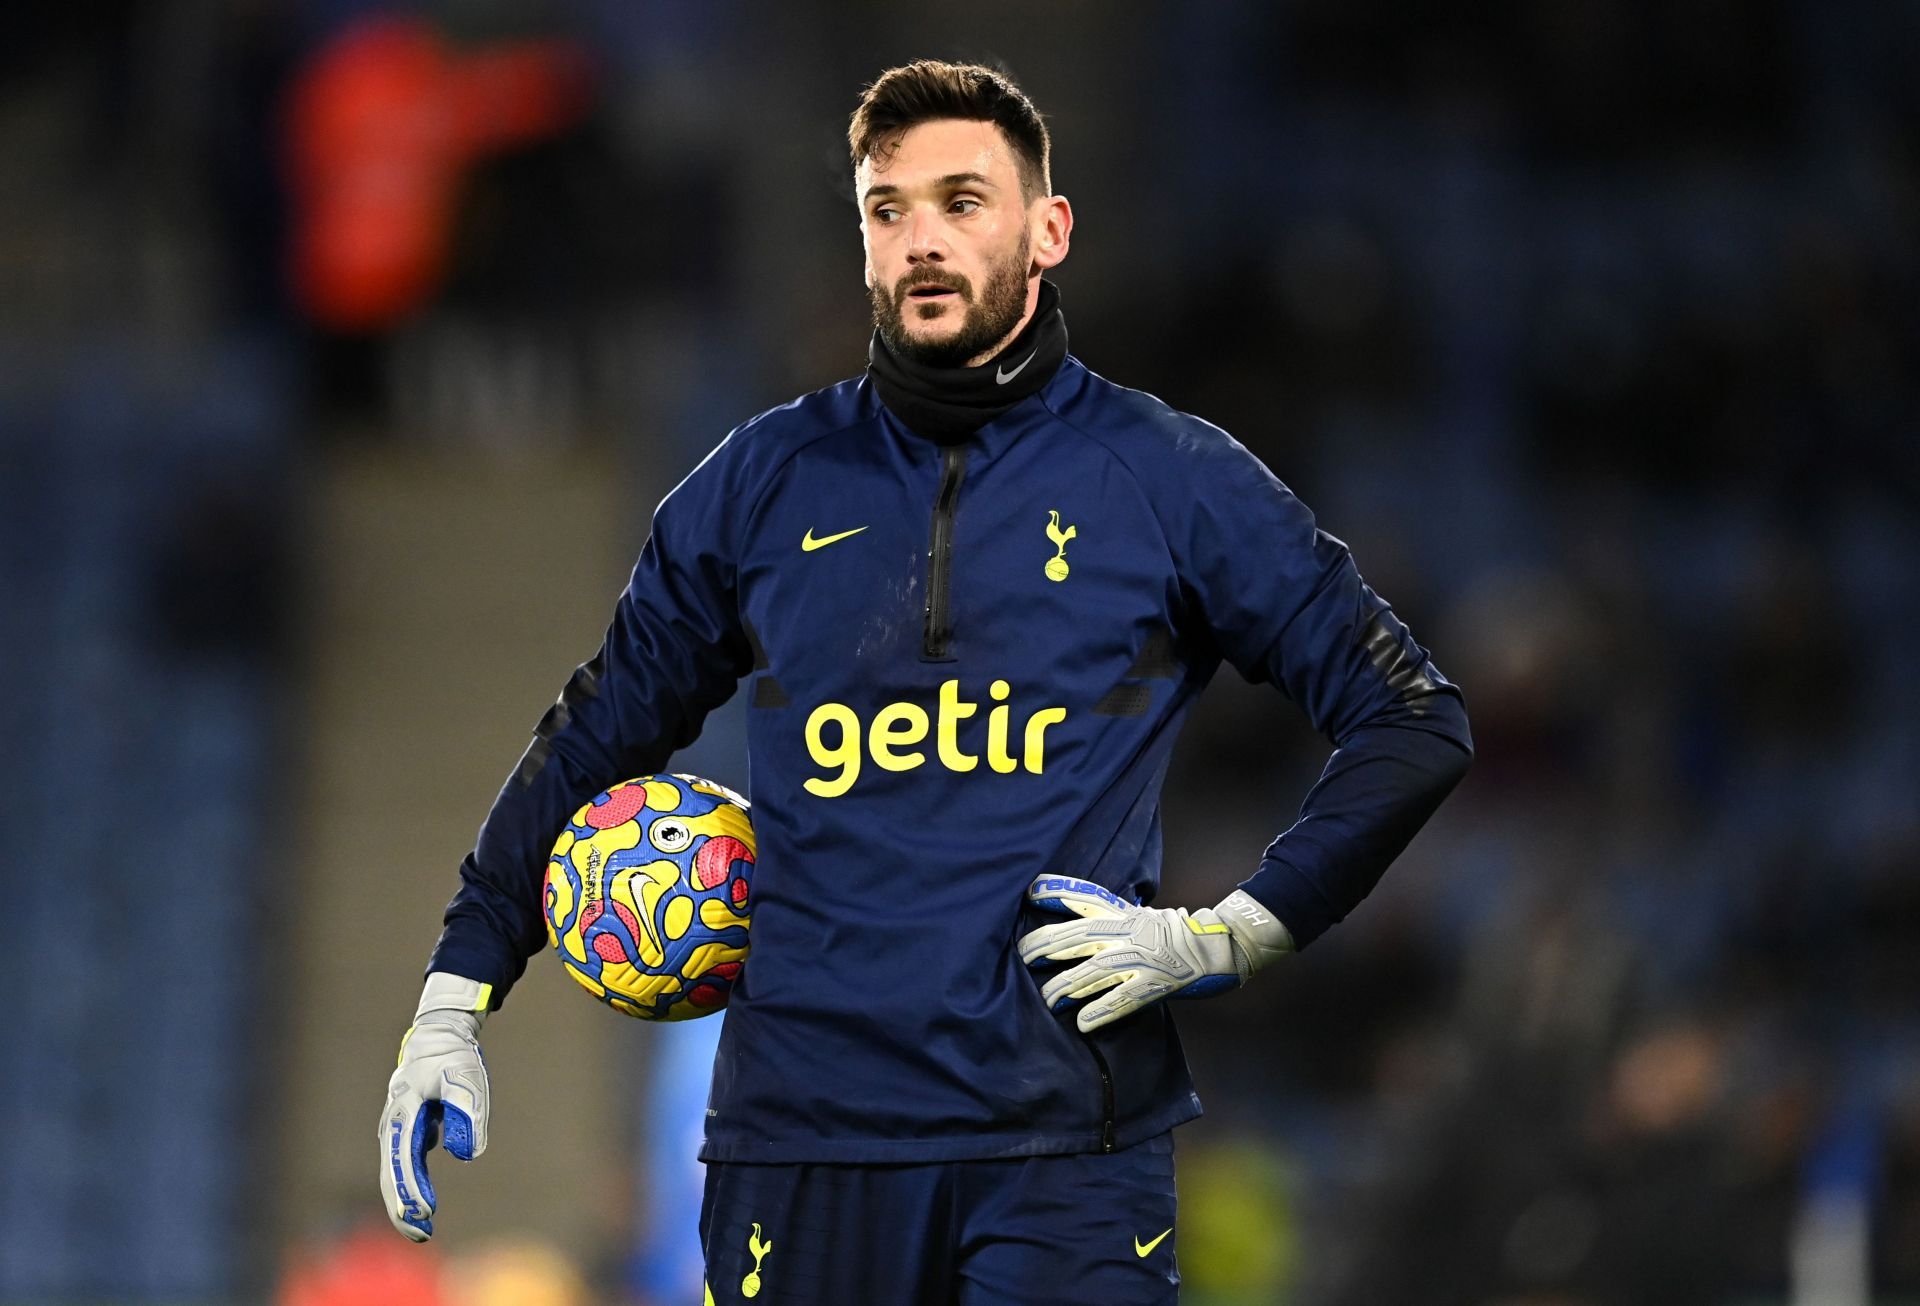 Hugo Lloris&#039; lack of silverware with Tottenham Hotspur may be one of the reasons he is often overlooked